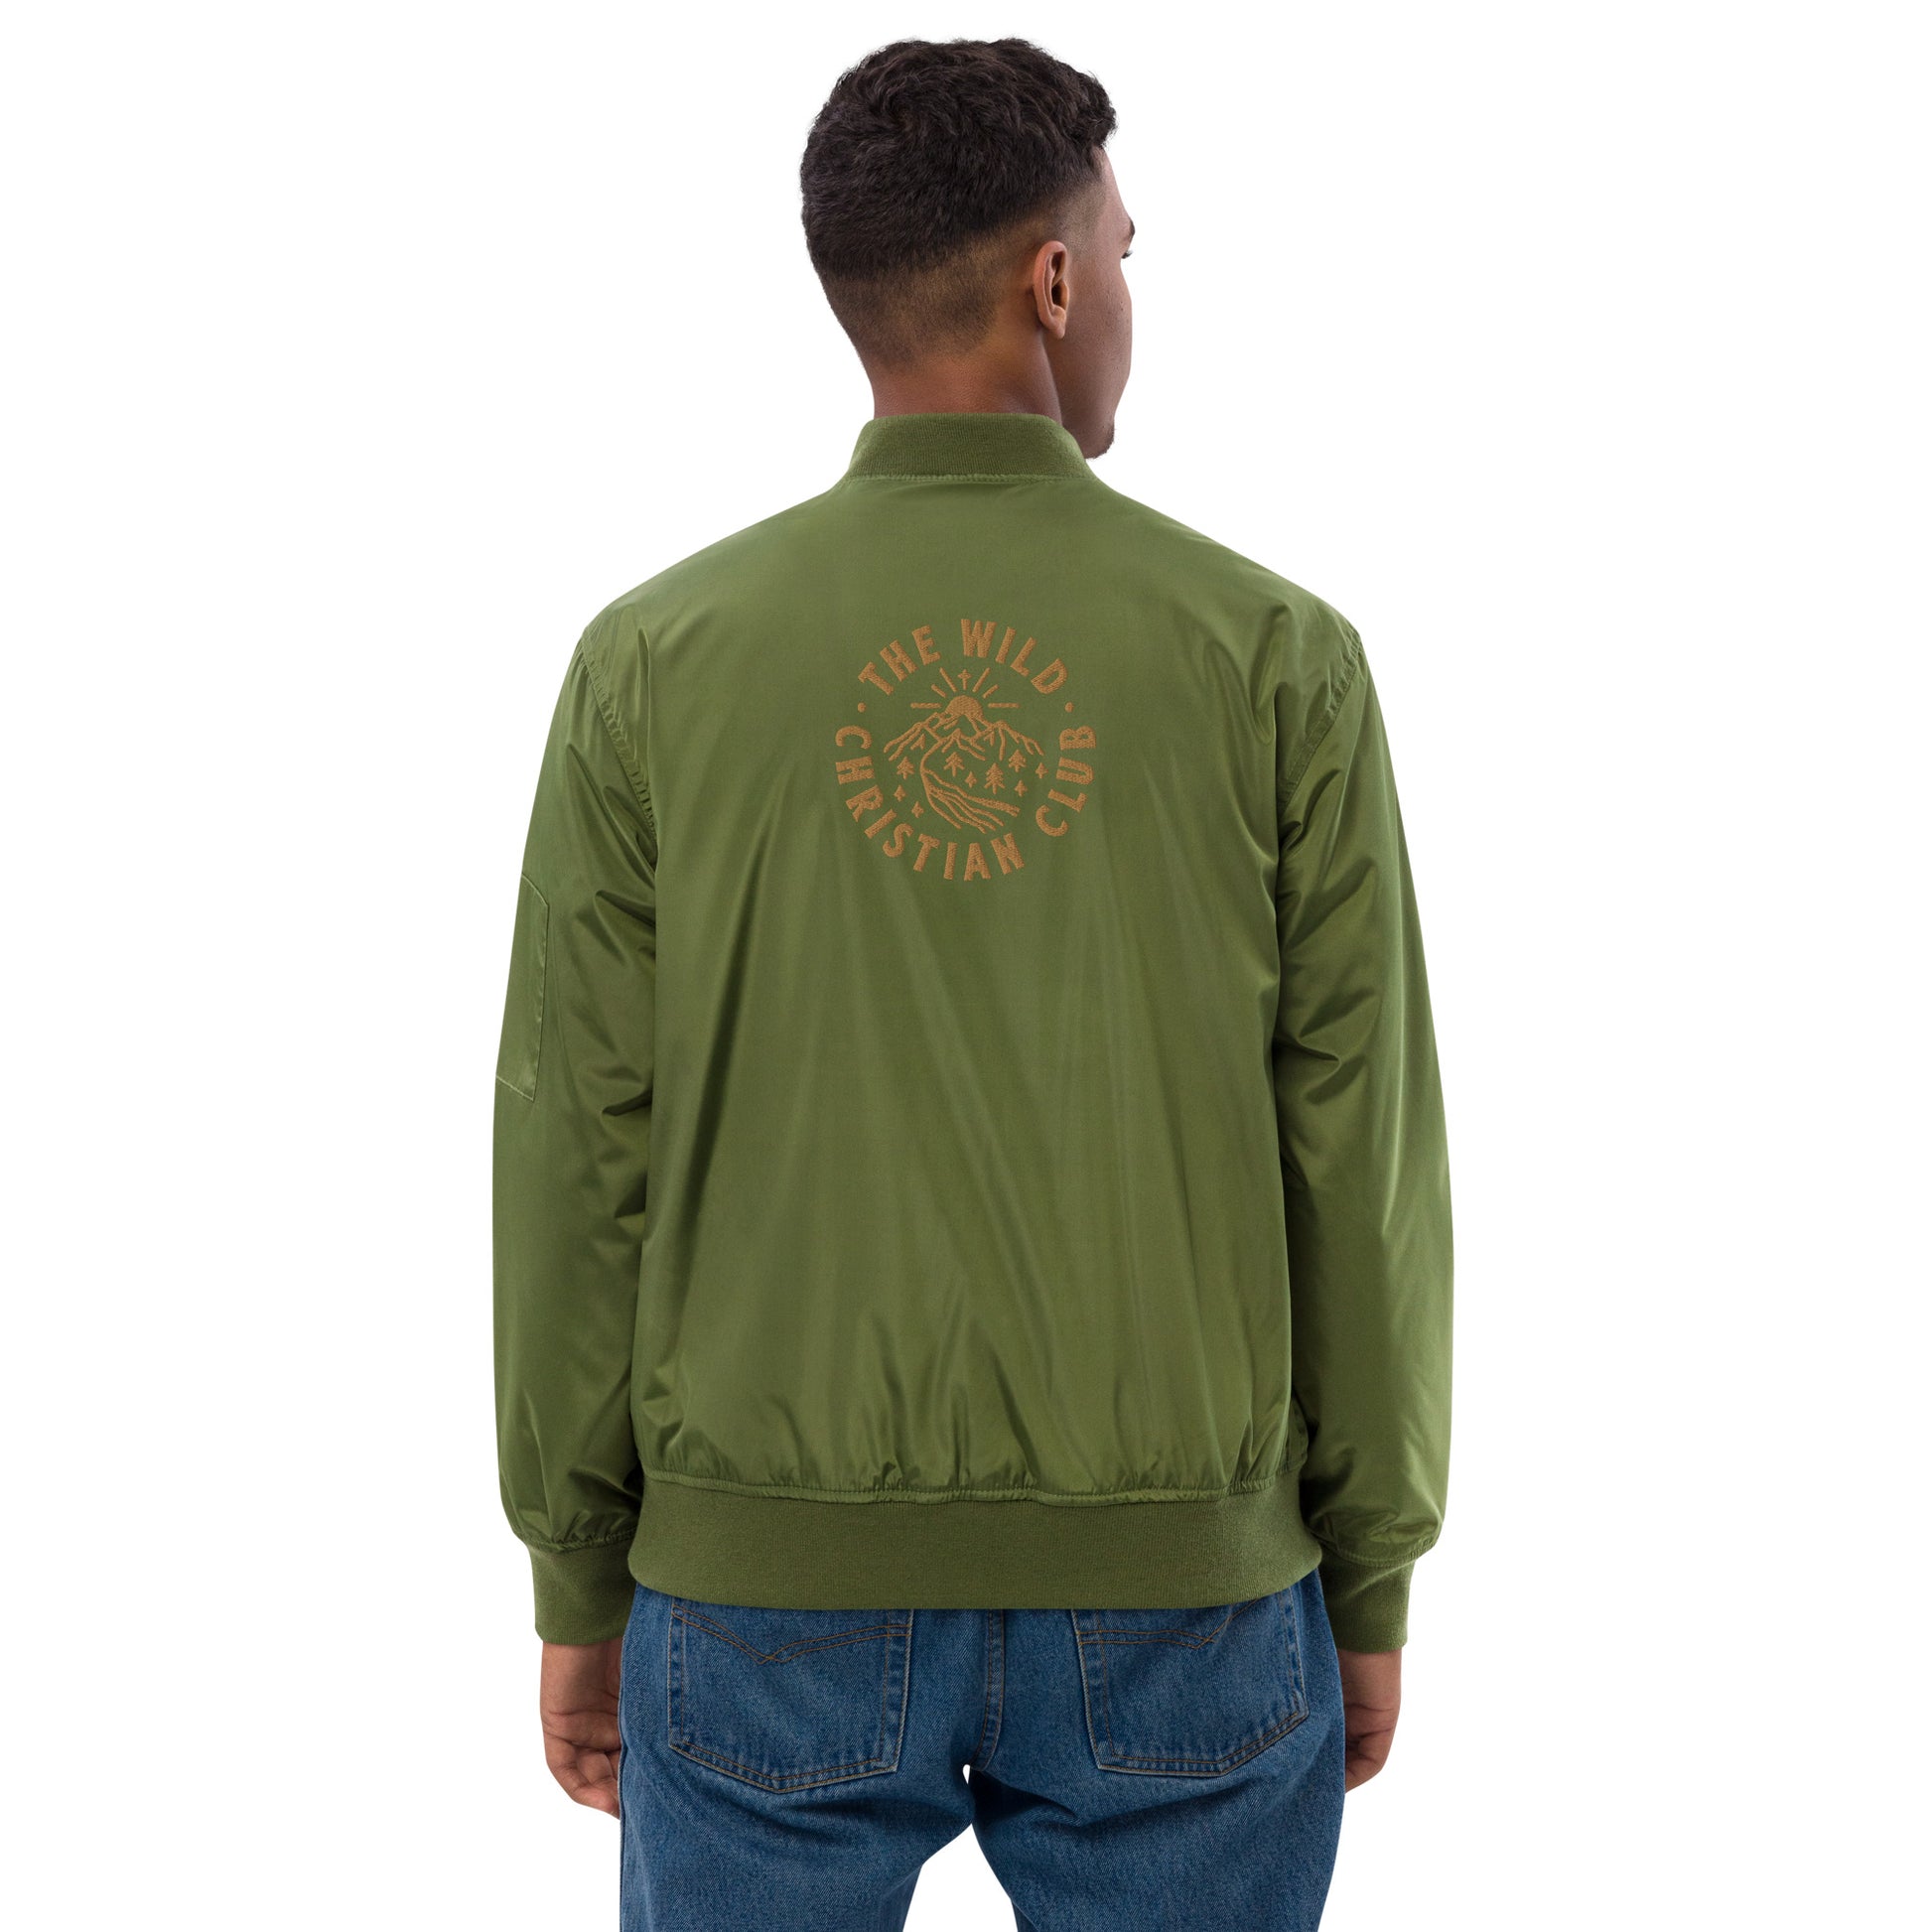 Premium Recycled Bomber Jacket - TWCC - A Thousand Elsewhere